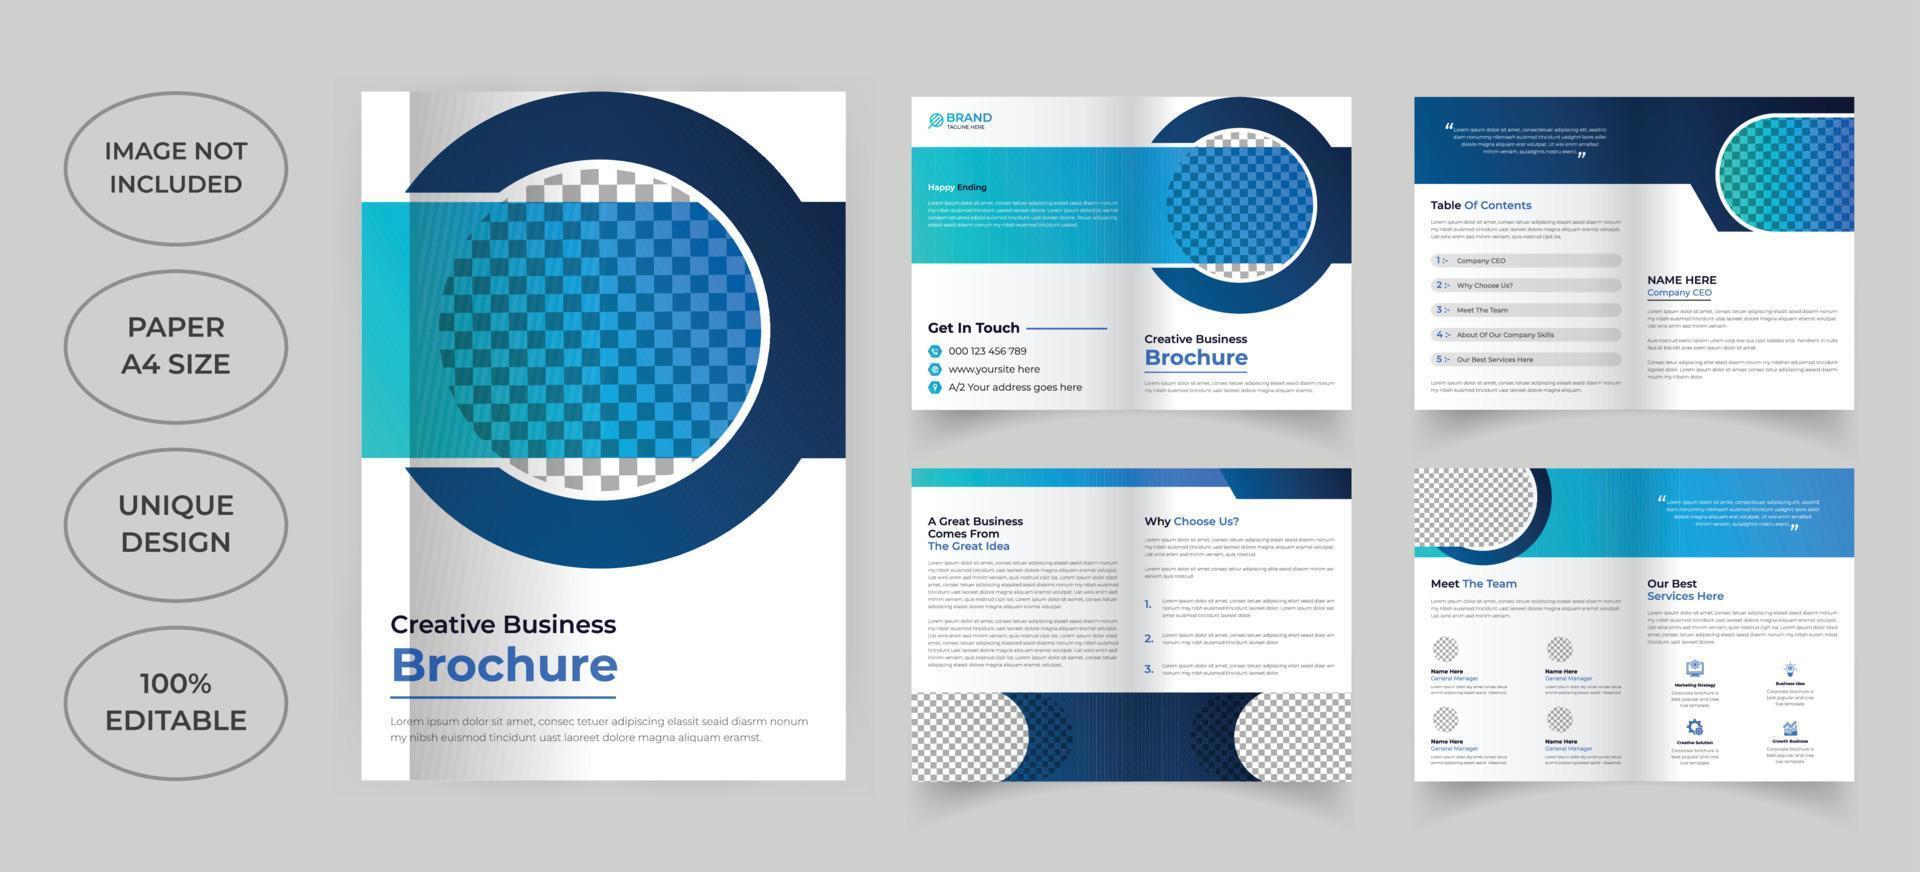 Eight pages corporate brochure template vector